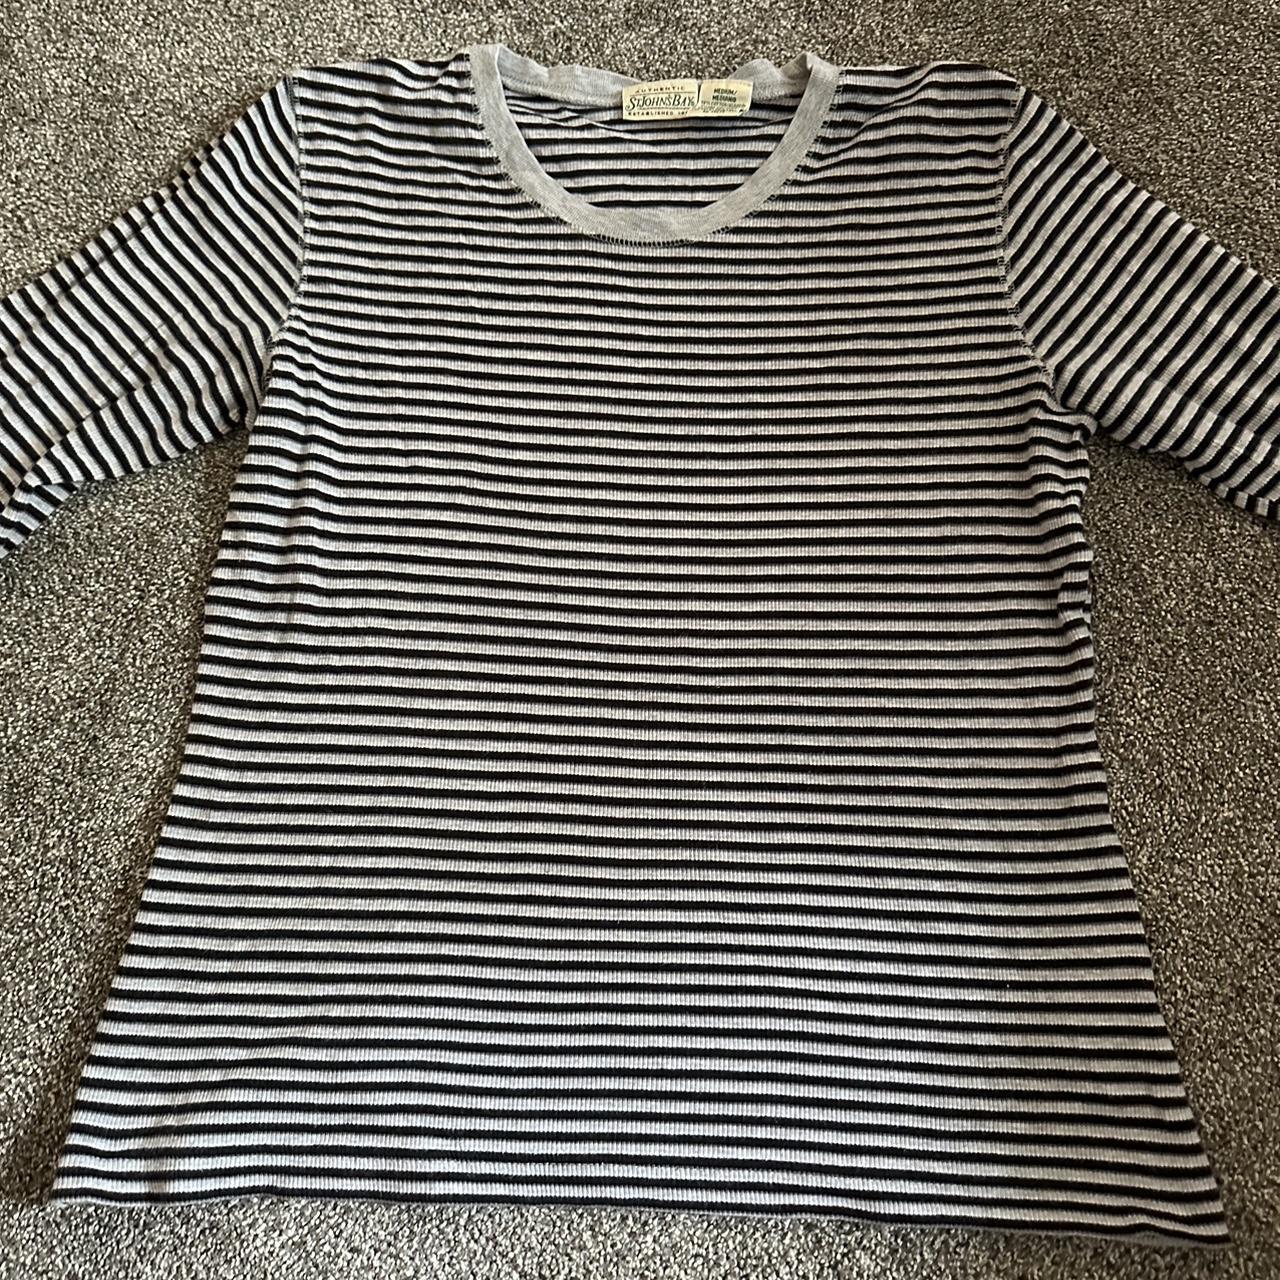 Vintage gray and black thin striped thermal long... - Depop